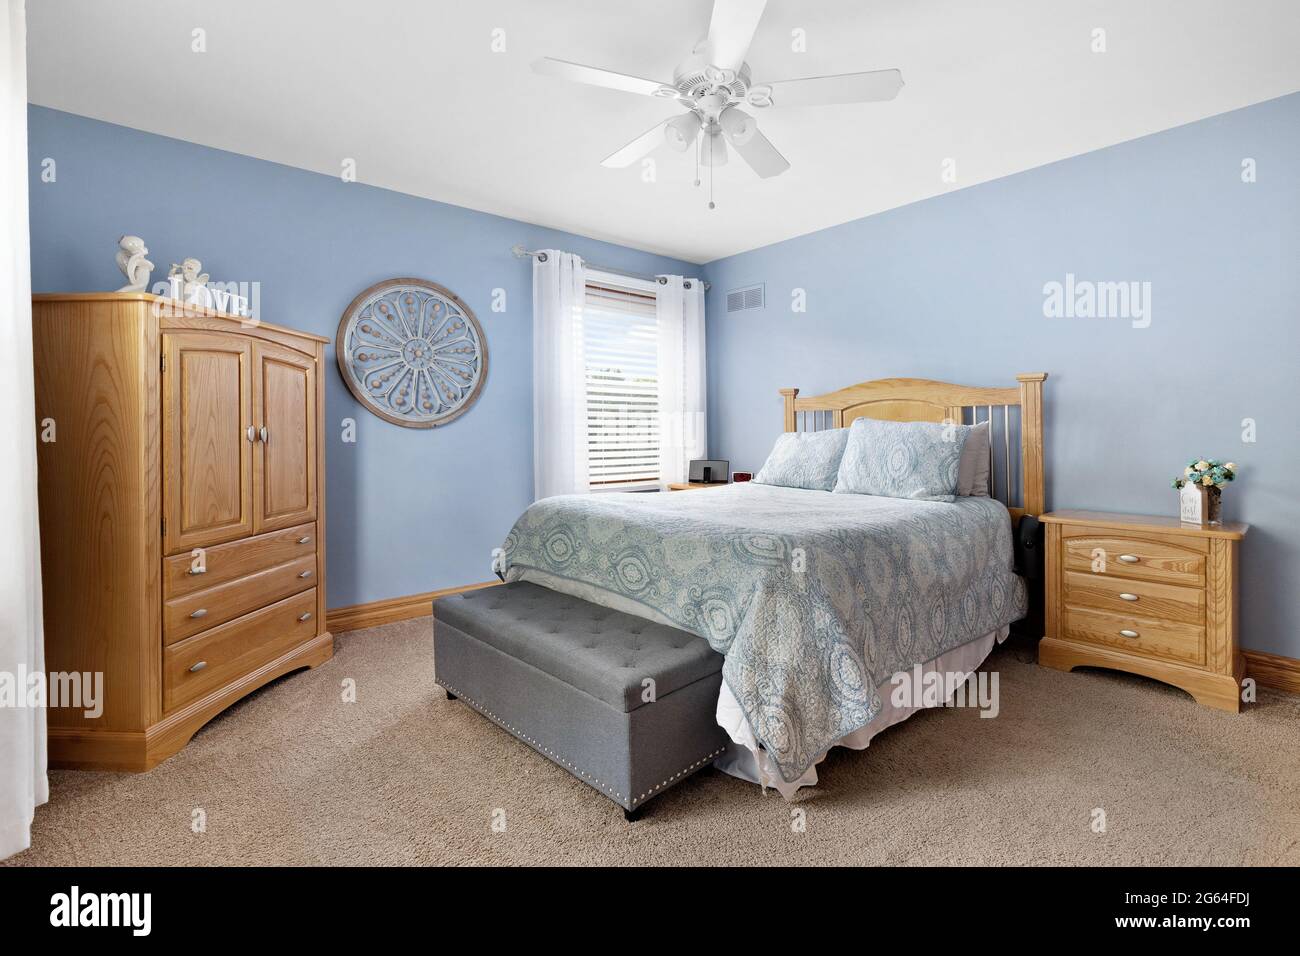 a-cozy-bedroom-with-blue-walls-natural-wood-furniture-and-carpeted-floors-2G64FDJ.jpg